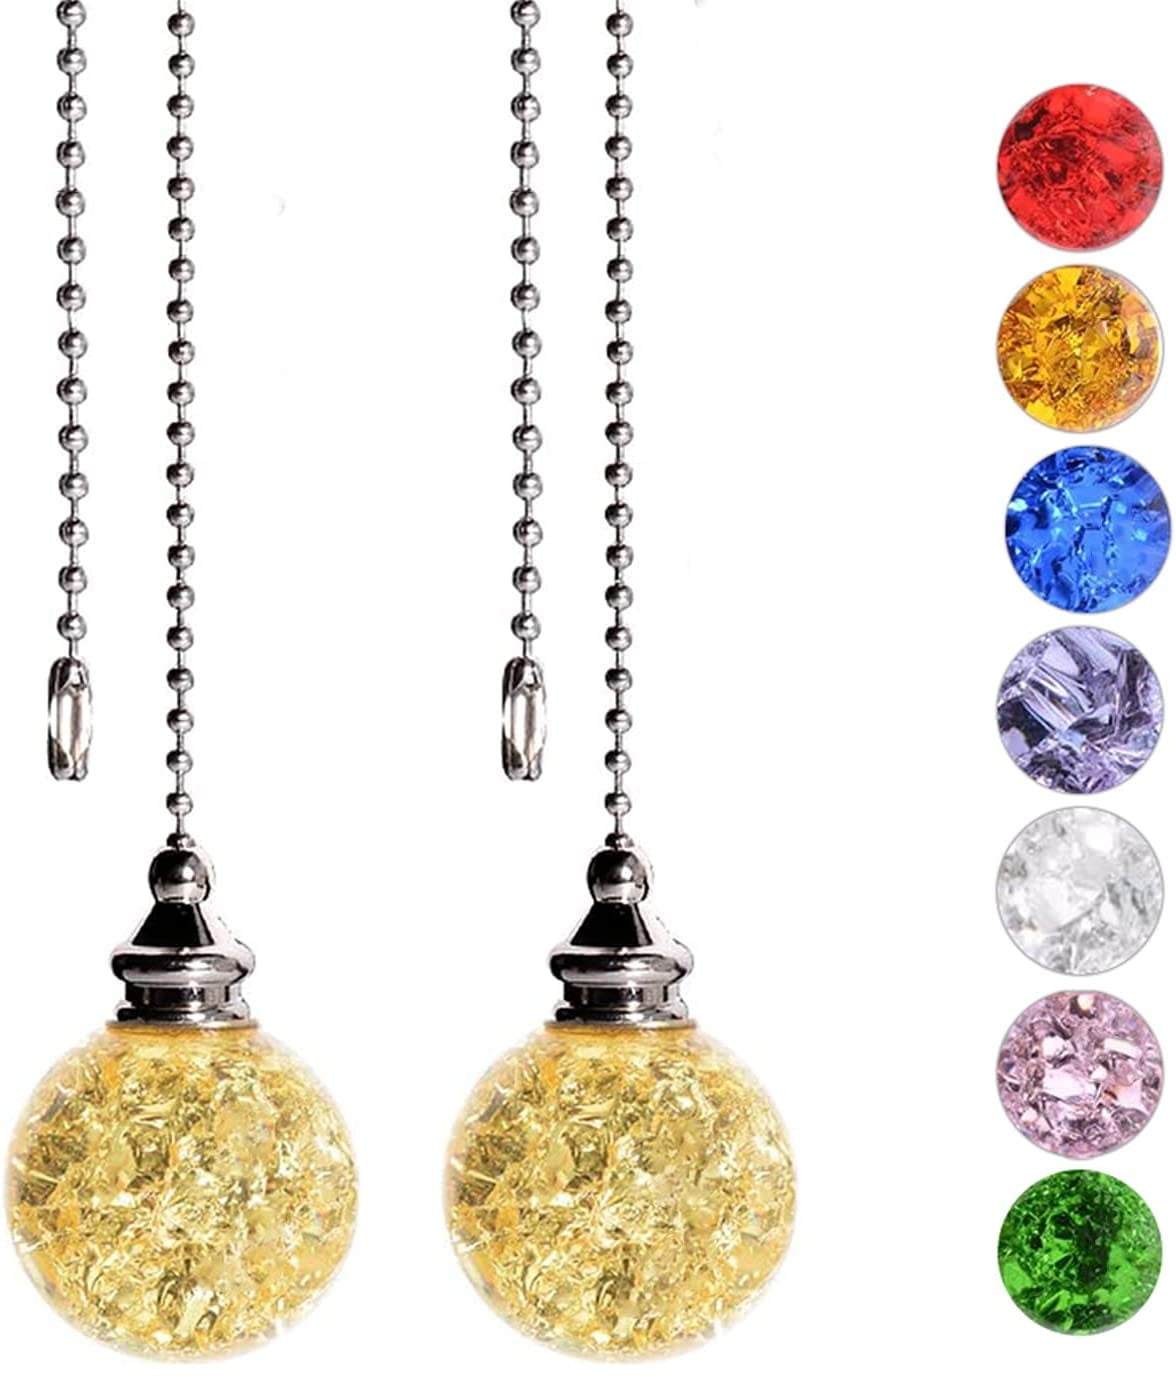 2Pc Crystal Glass Ceiling Fan Pull Ball Chain Extension Cord Pendant Light Decor 